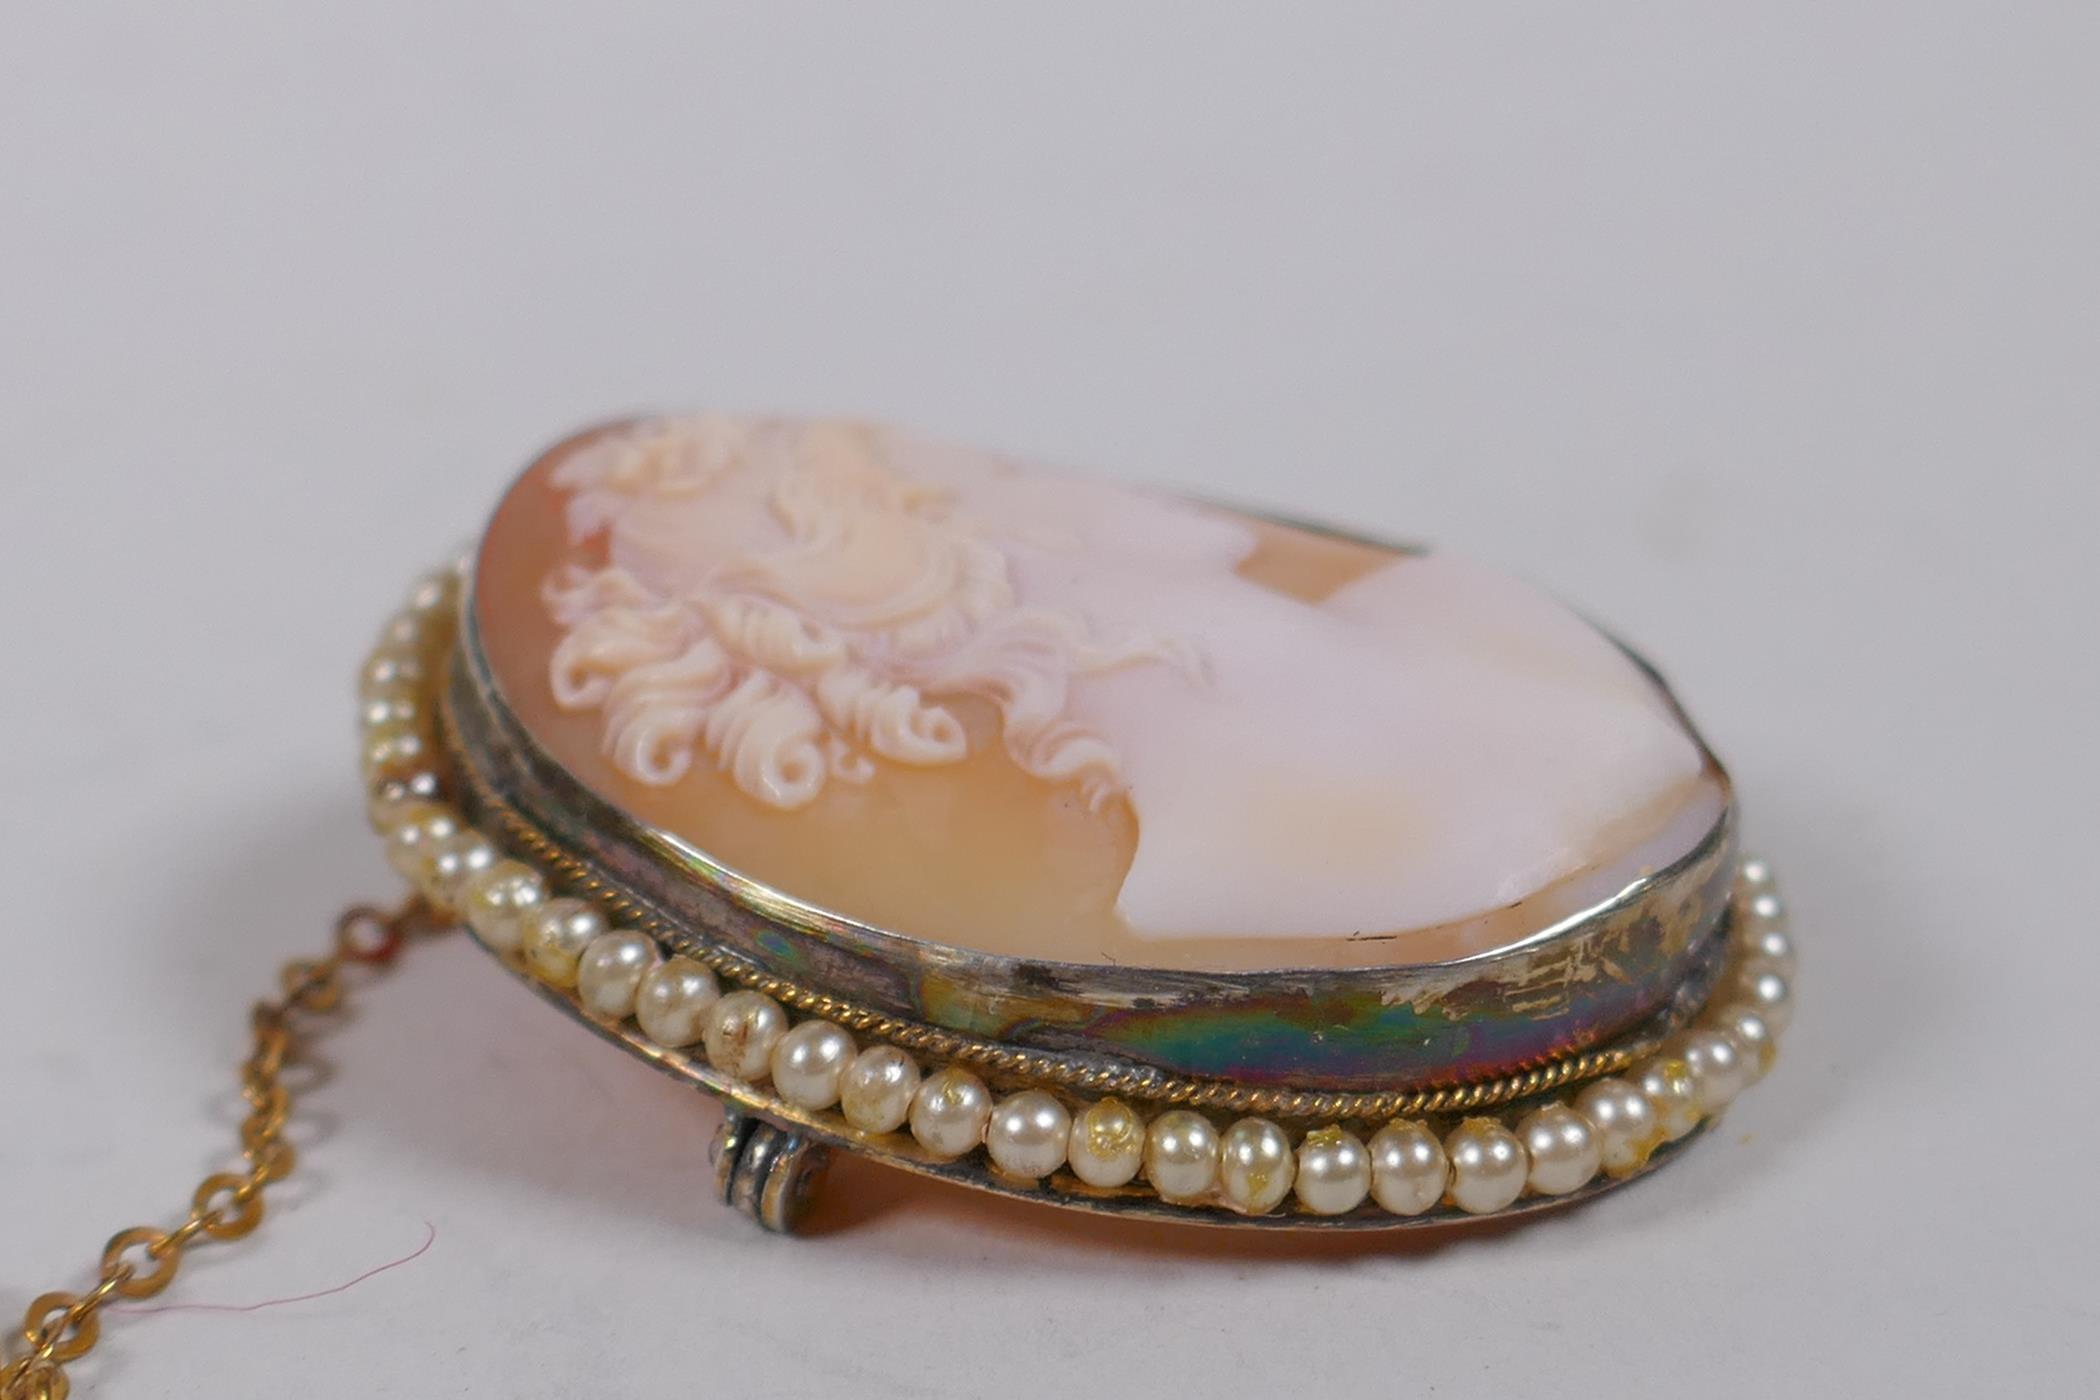 An antique cameo brooch and another flower brooch, largest 4 x 3cm - Image 4 of 6